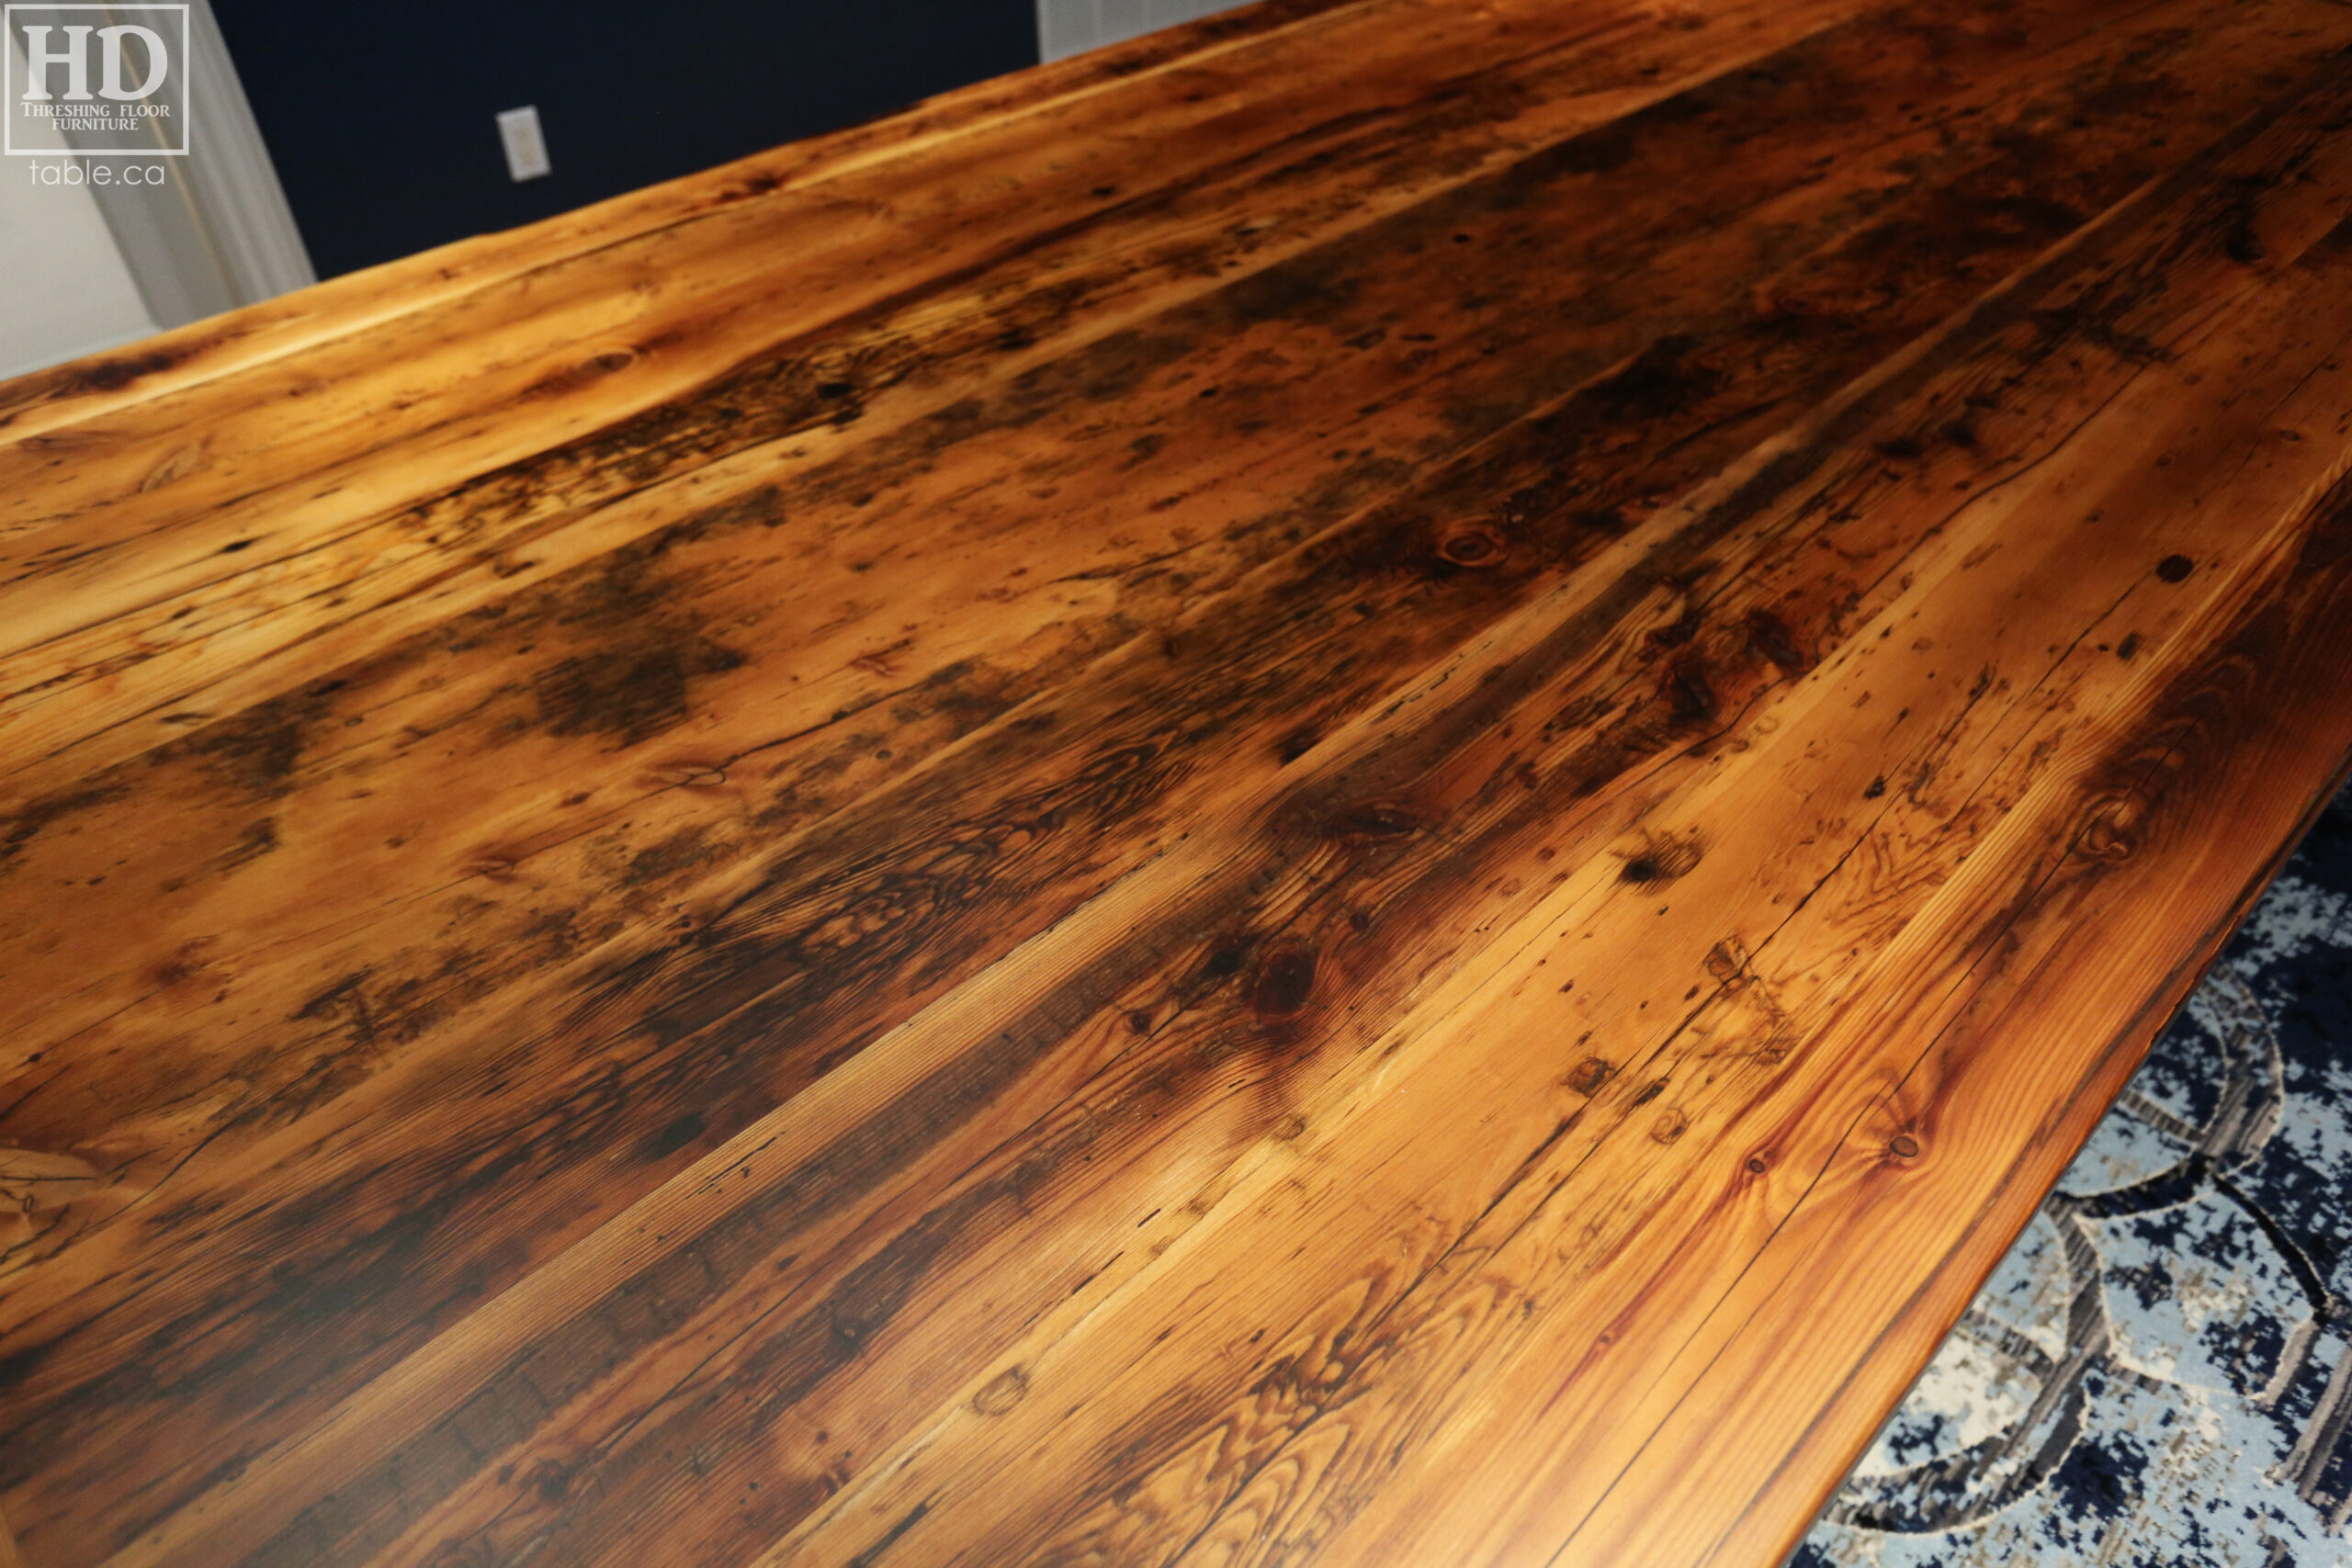 Project details: 10' Ontario Barnwood Table we made for a Woodbridge, Ontario home - 60" wide â€“ Trestle Base â€“ Reclaimed Old Growth Hemlock Threshing Floor Construction / Minimal Sanding out of Original Patina â€“ Original edges & distressing maintained â€“ Premium epoxy + matte polyurethane finish - www.table.ca